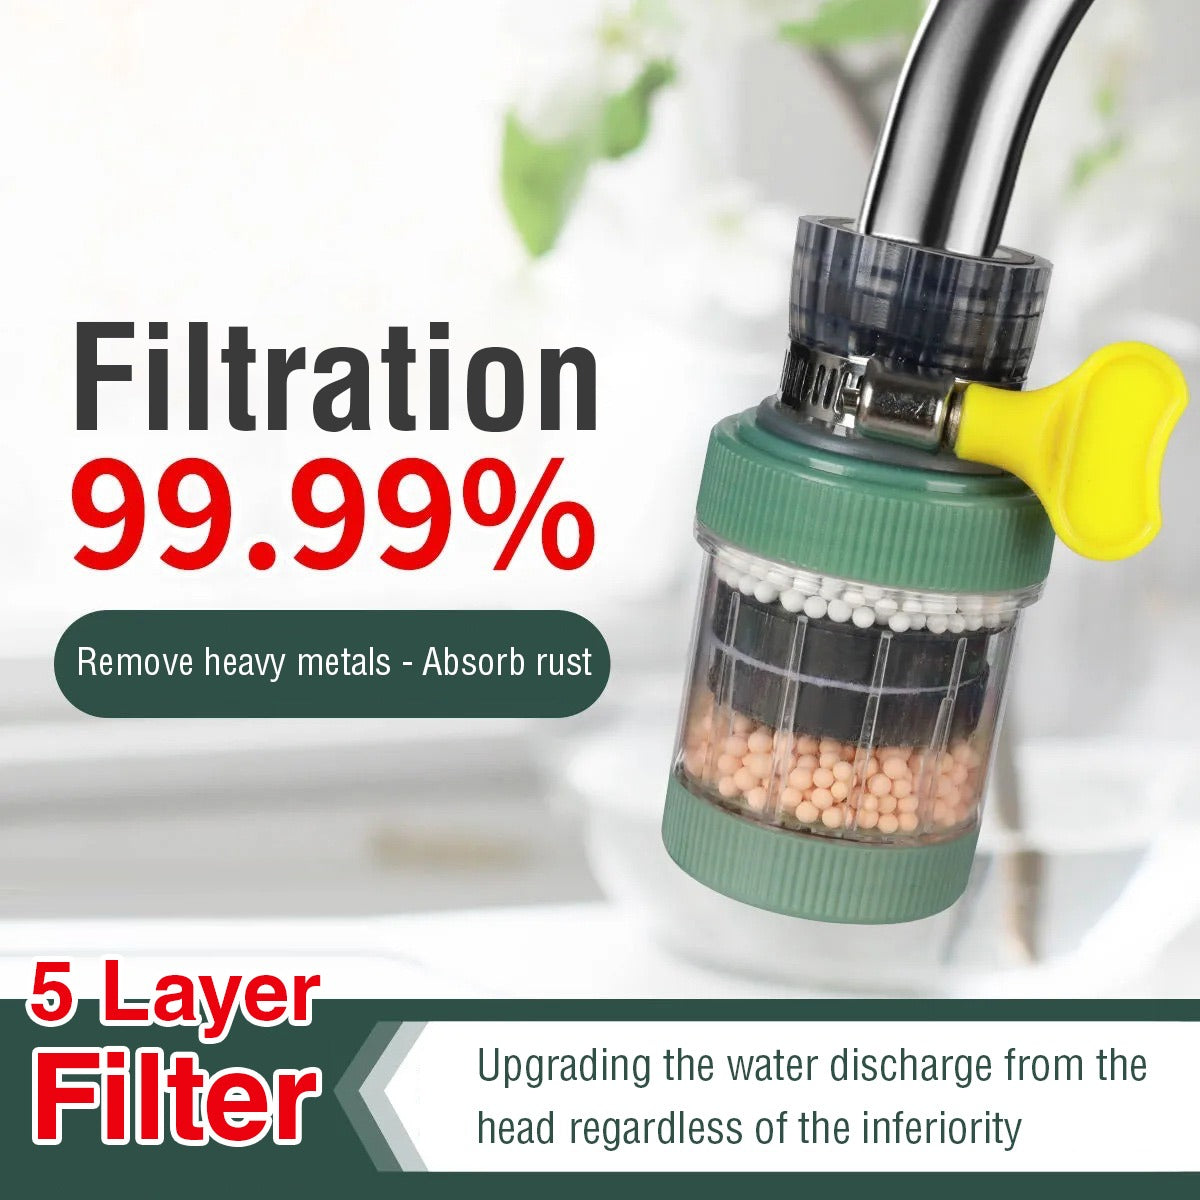 A sleek faucet water purifier designed for kitchen sinks, effectively filtering water for a cleaner and healthier drinking experience